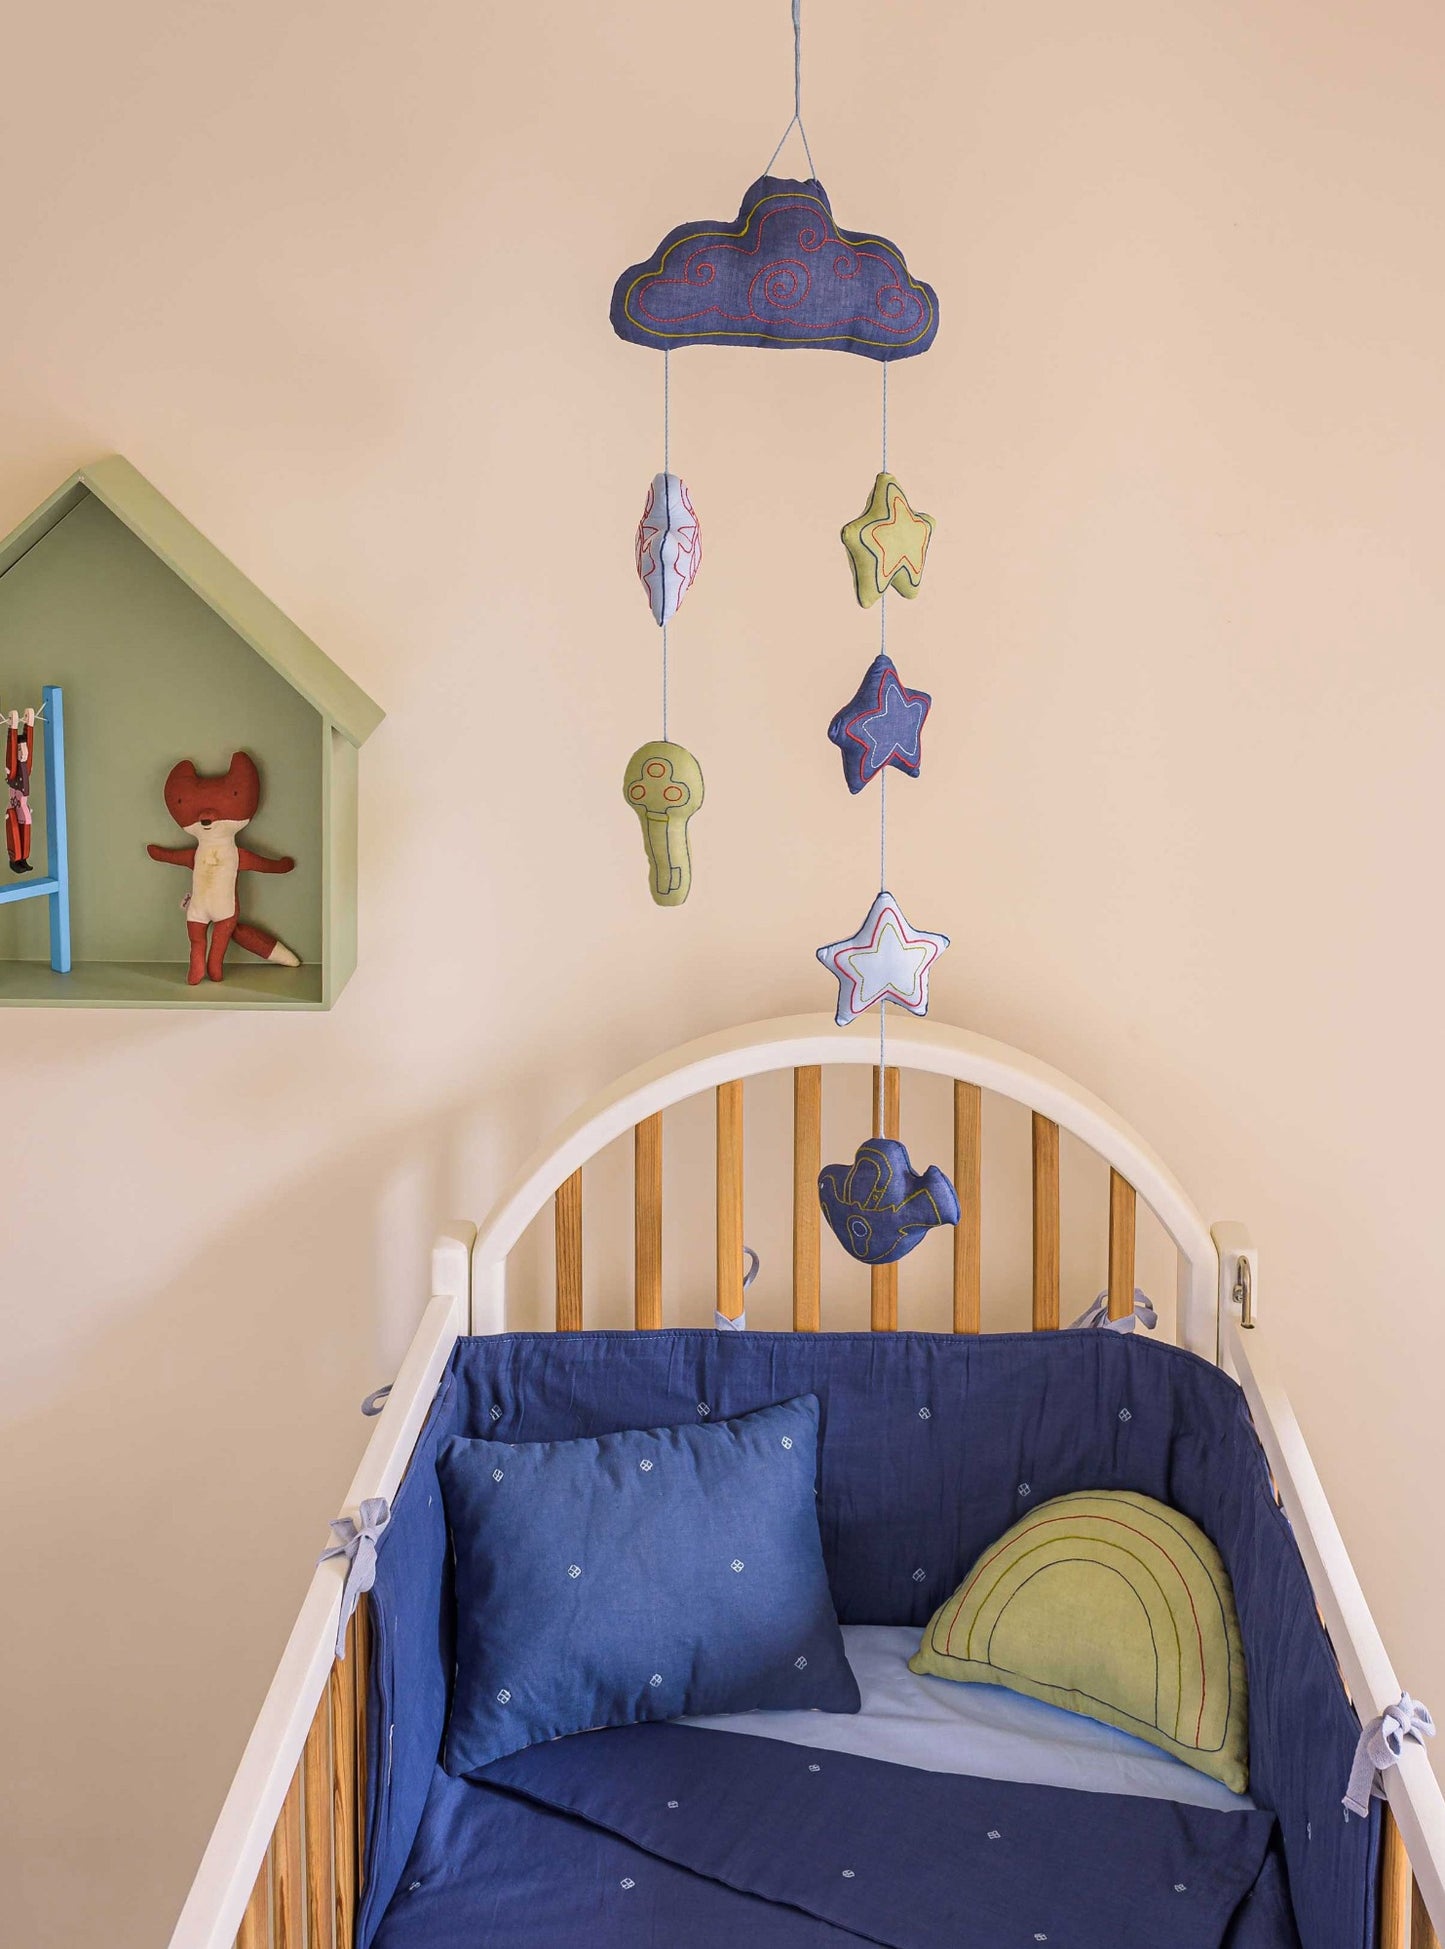 Blue Bandook pillow, blanket, bumper, Moshkel Gosha baby mobile with Lime rainbow cushion all set up in a baby nursery room